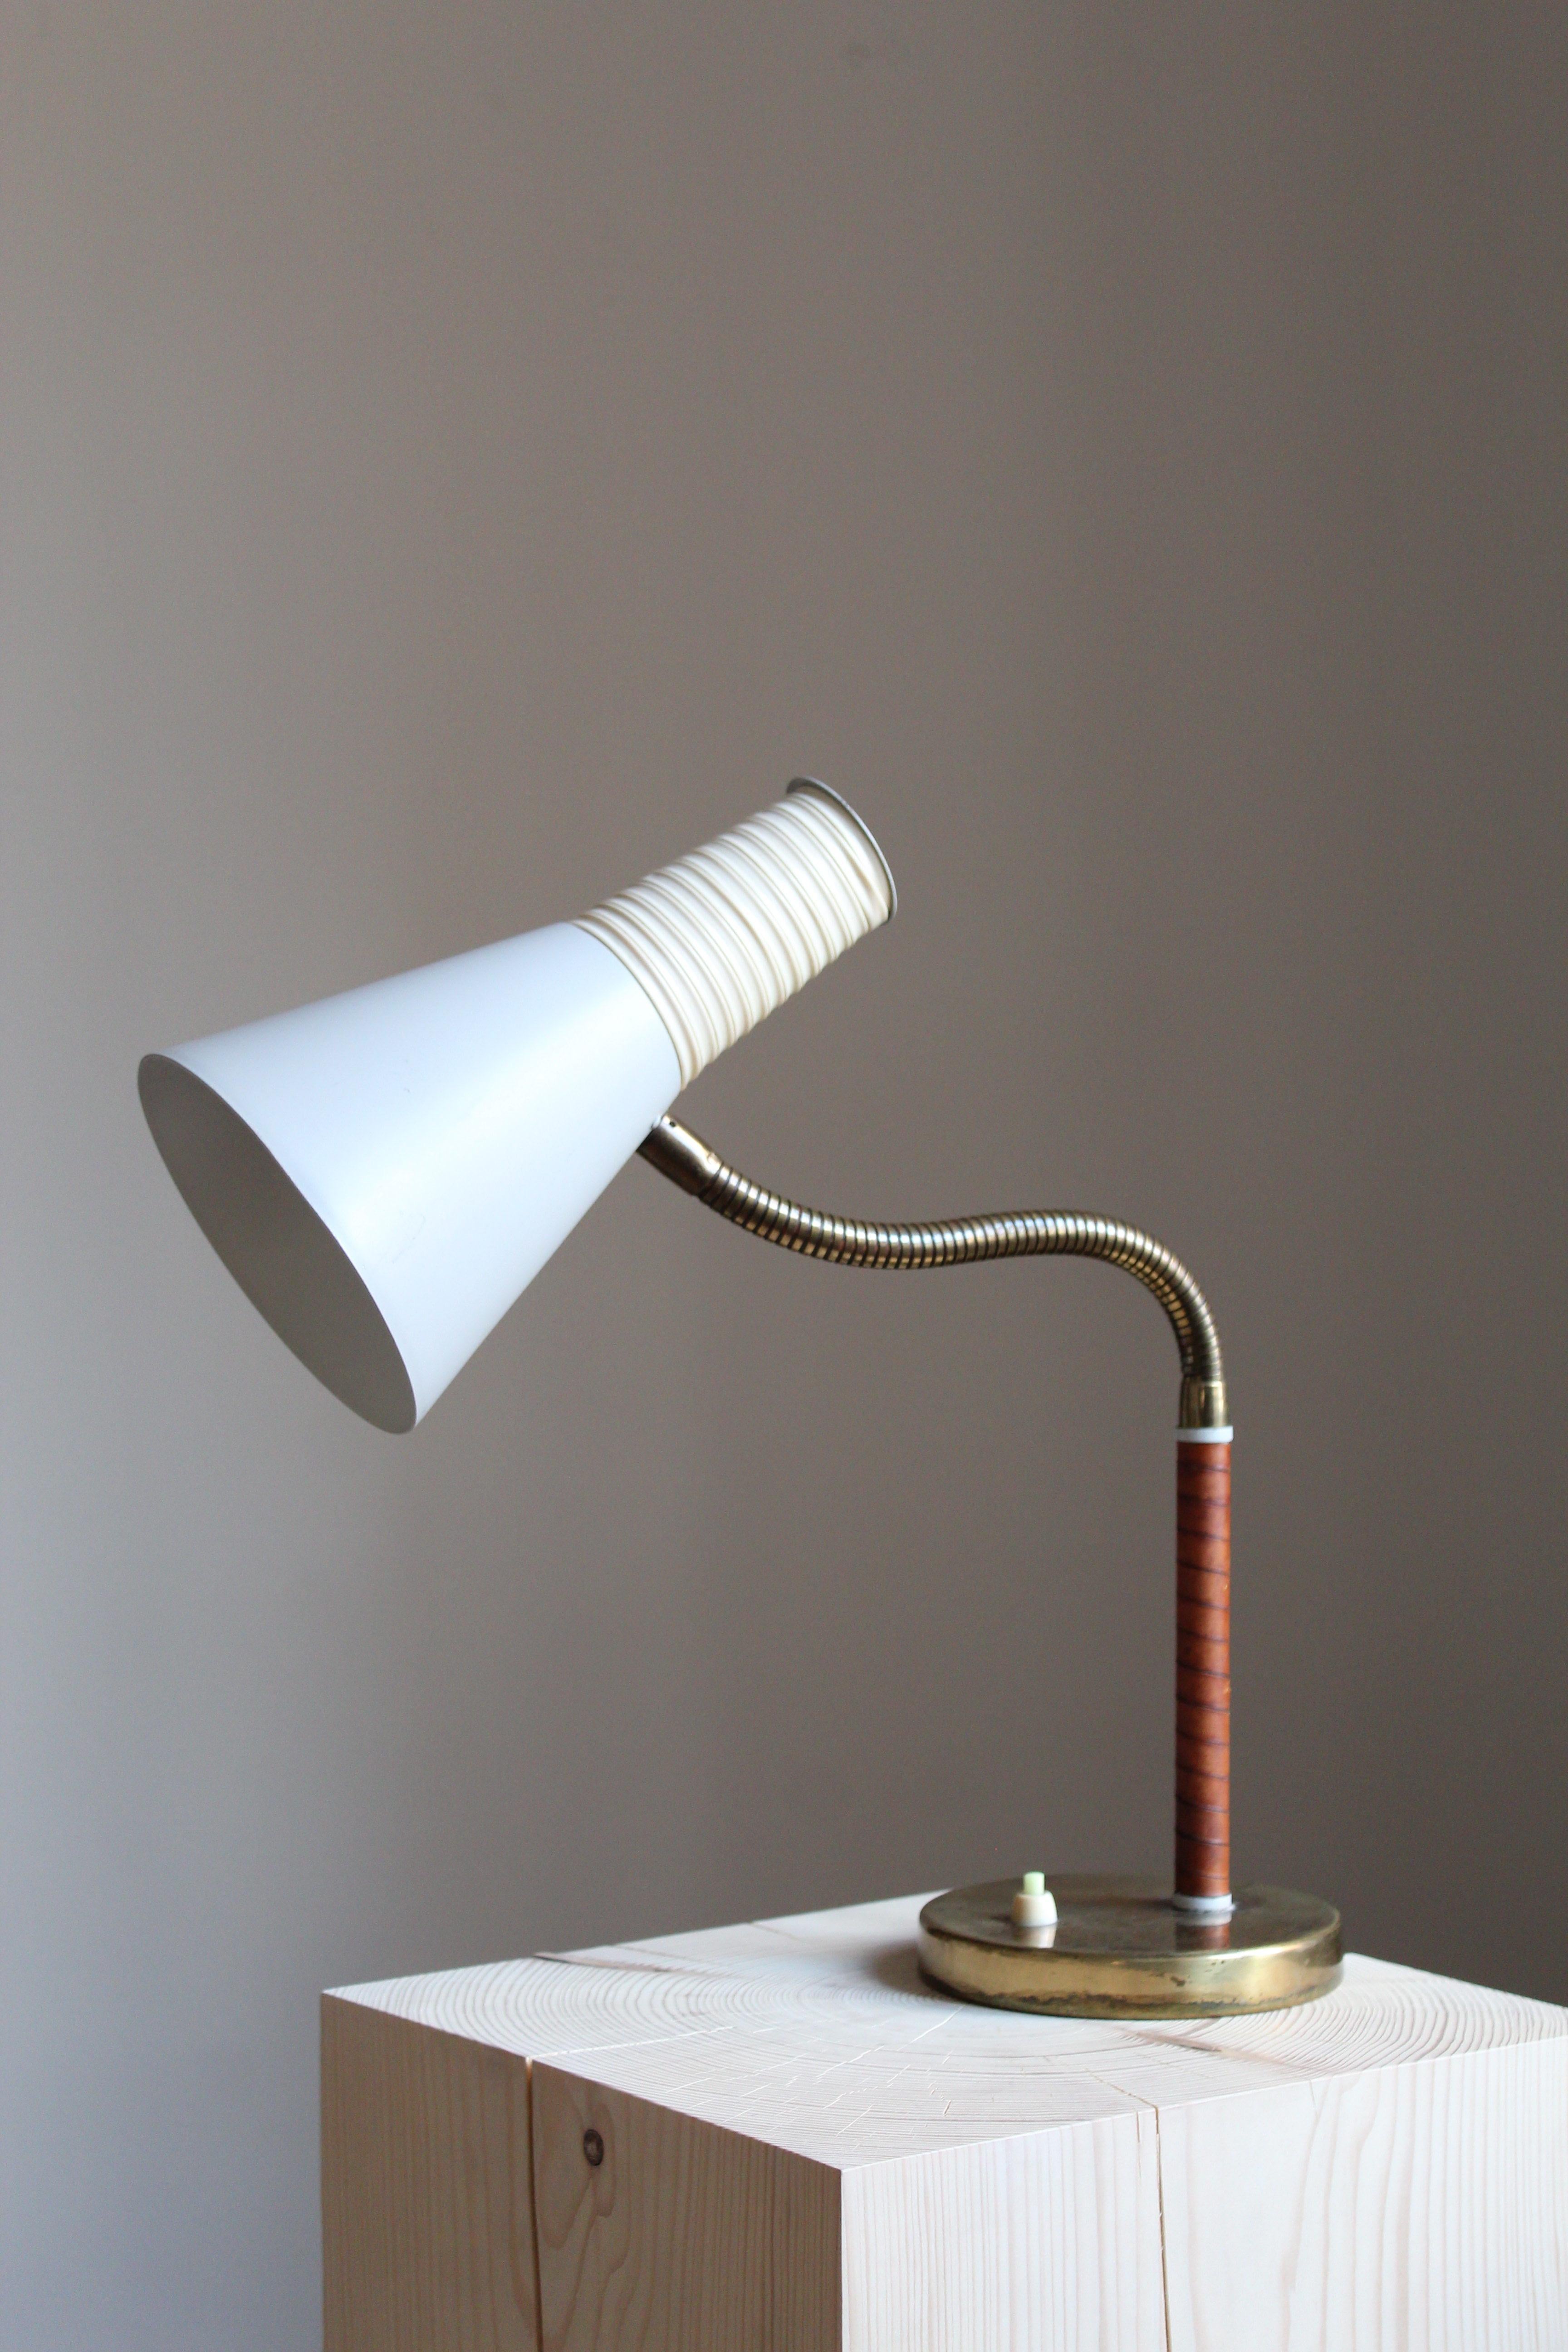 An adjustable desk / table lamp by Finnish producer Itsu. Marked. Brass, lacquered metal. Rod wrapped in original leather. Features wrapped acrylic on lampshade.

Dimensions variable, measured as illustrated in third upright position.

Other